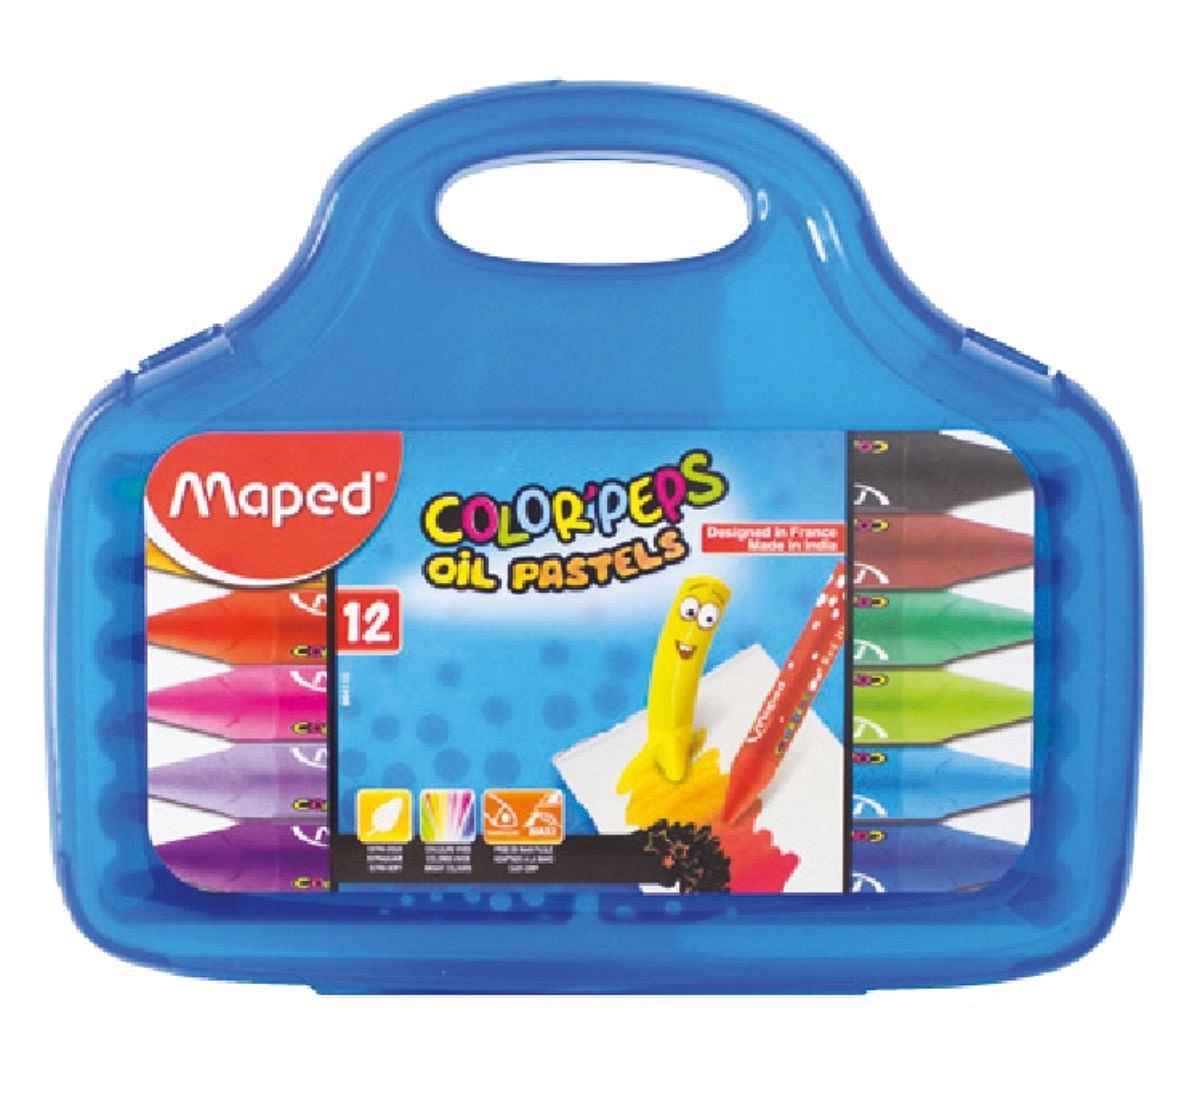 Maped Pastels - 12 Shades, 7Y+ (Multicolour)